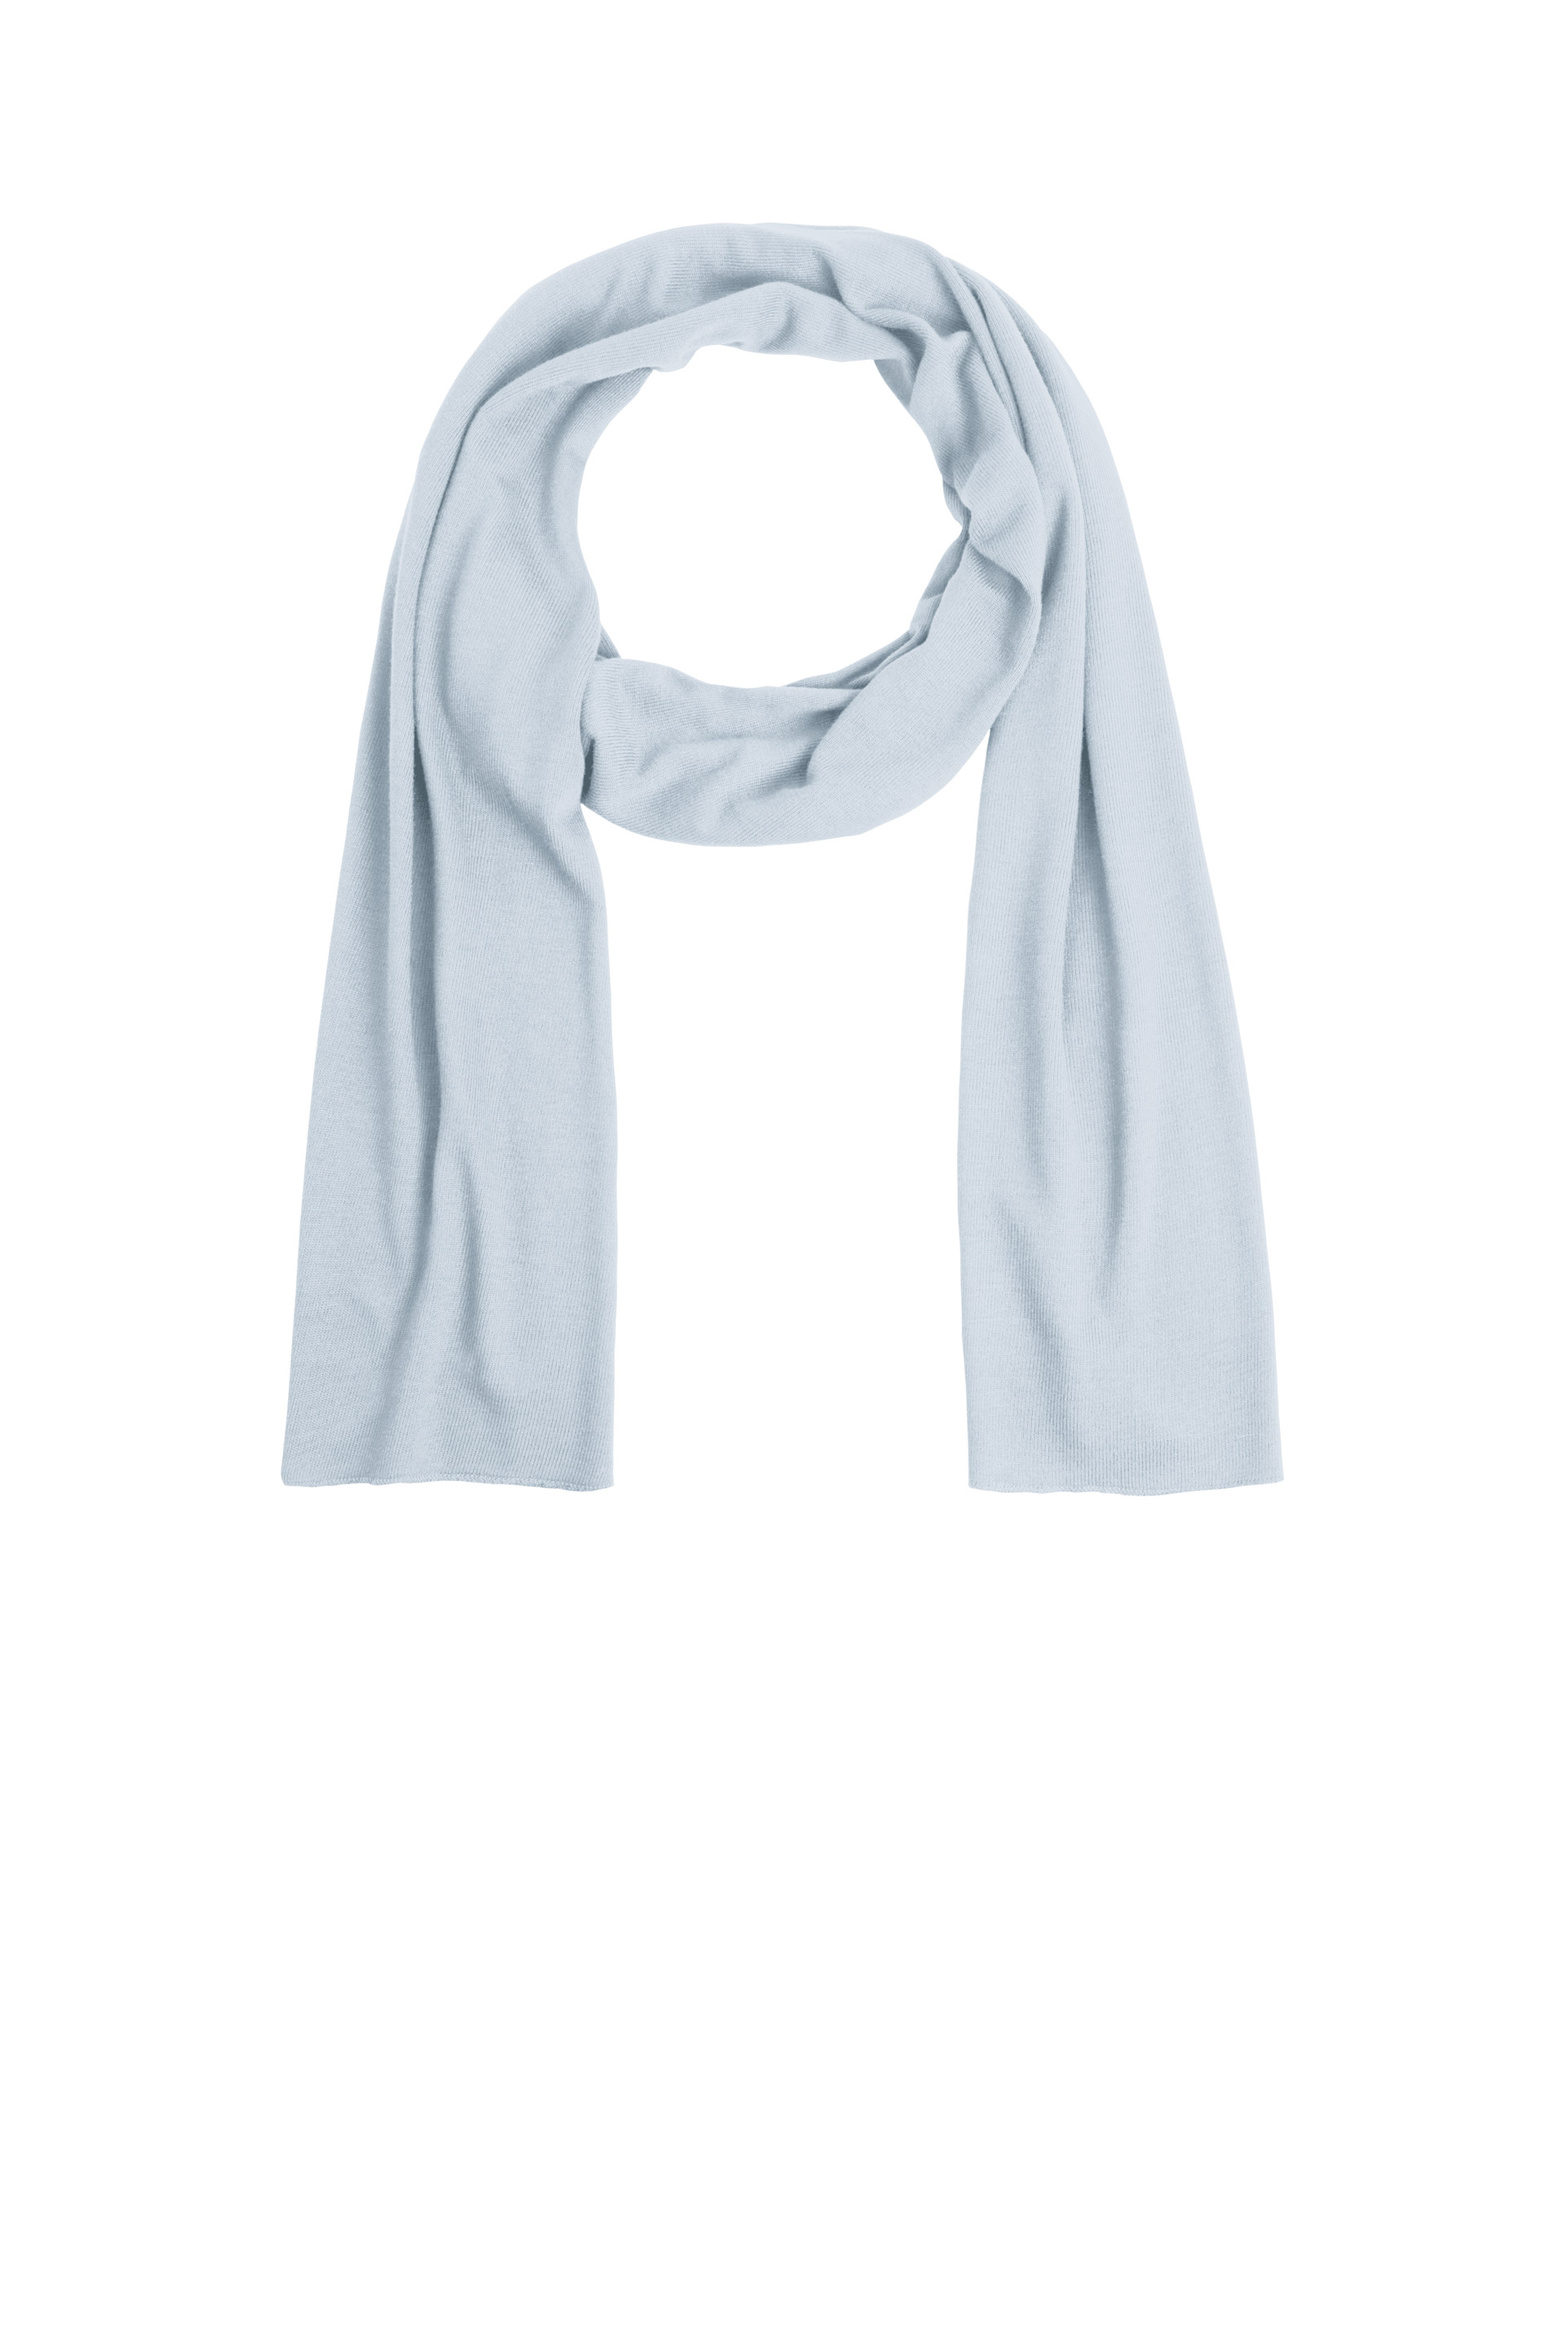 33028_willow_scarf_silver_new.jpg